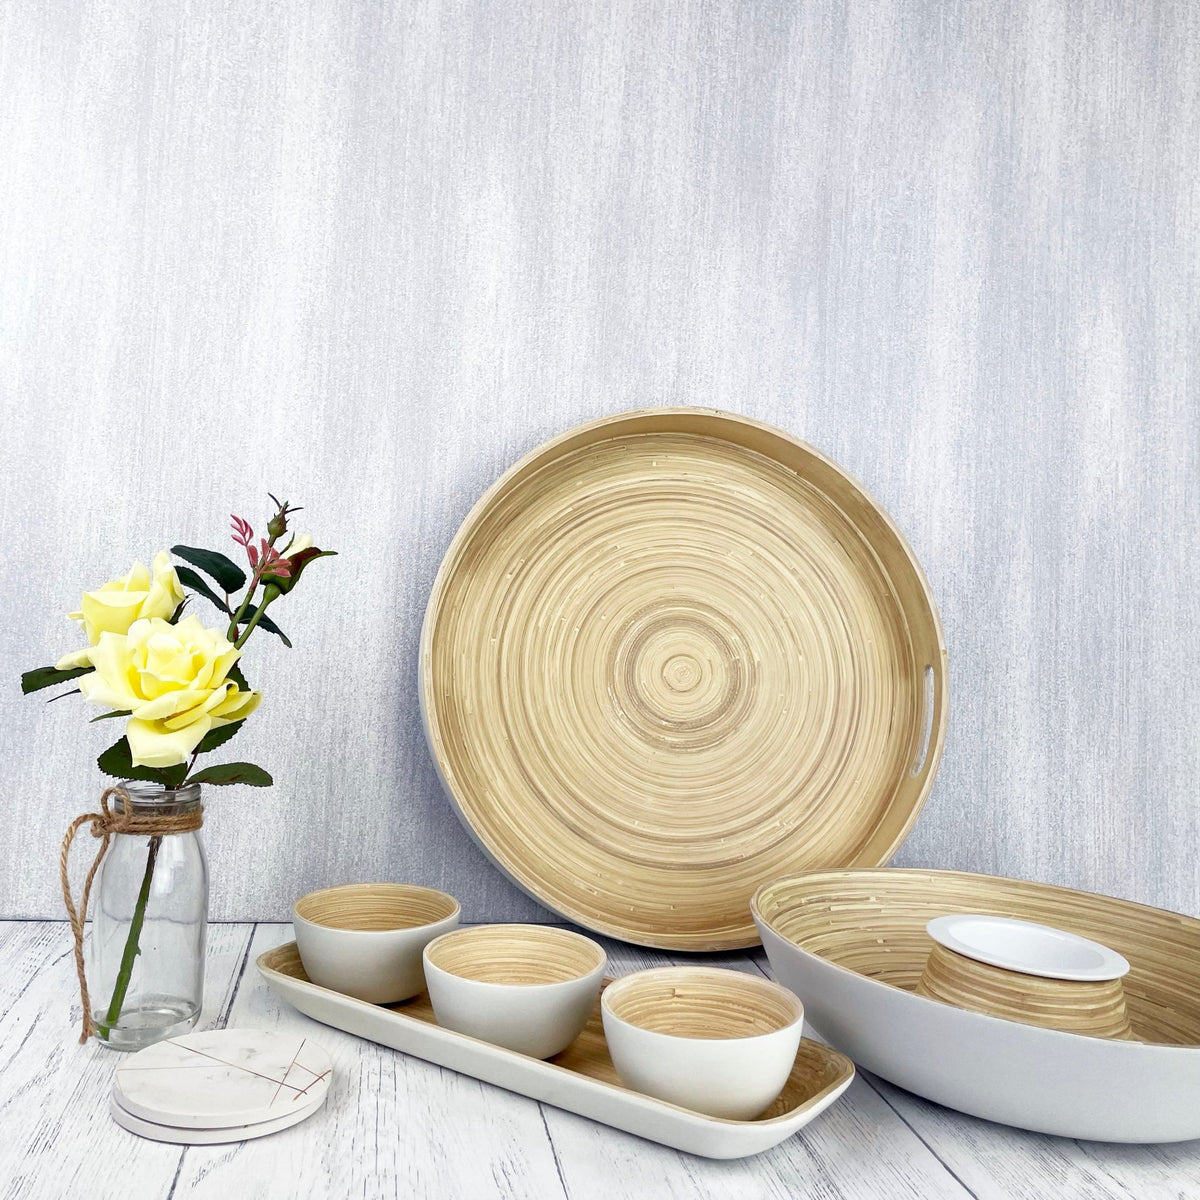 Pandam Bamboo Serving Tray Set on White Table